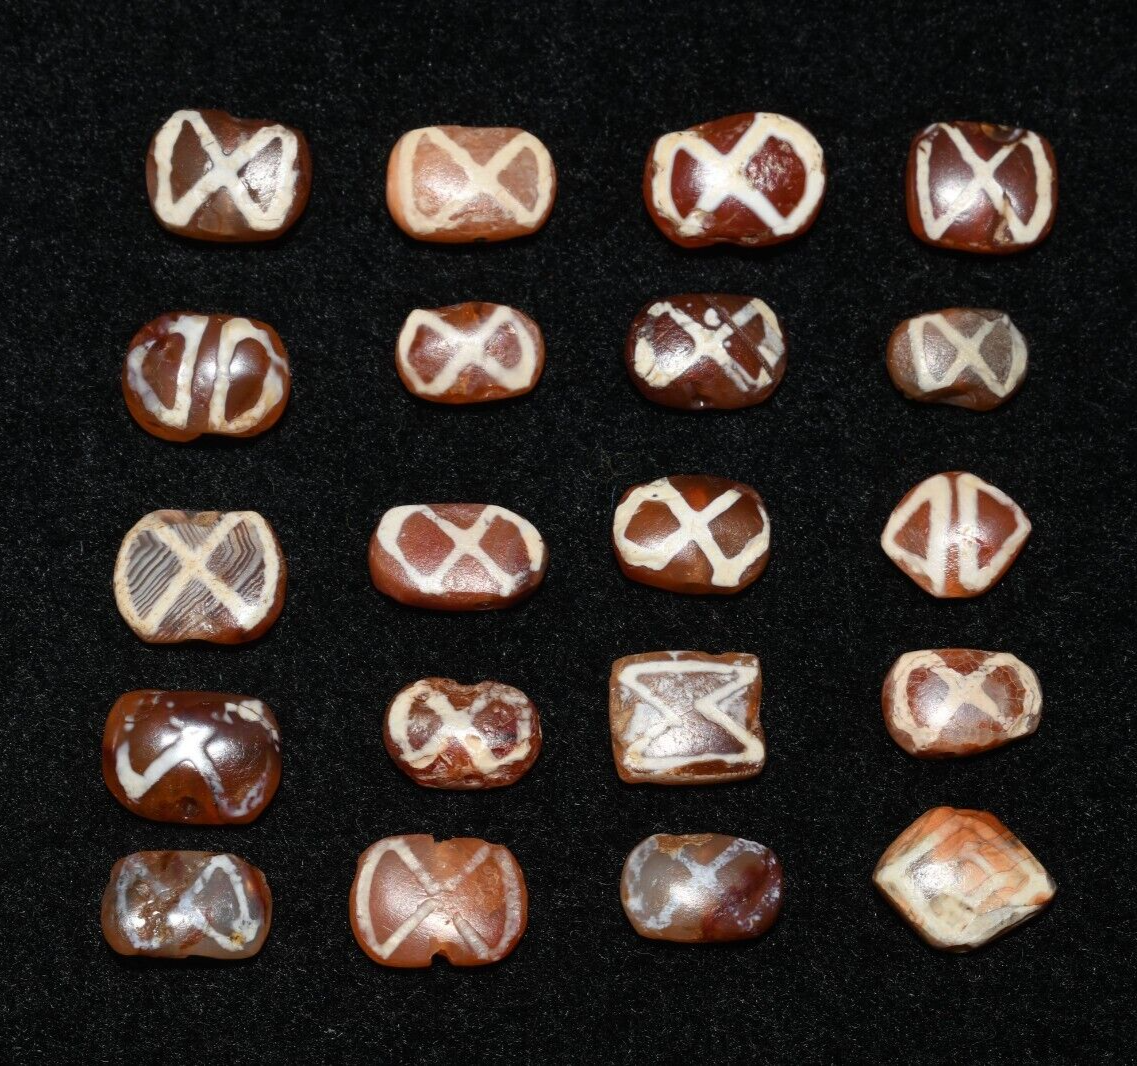 Lot Sale 20 Ancient Indus Valley Etched Carnelian Beads Circa 2600-1700 BCE Без бренда